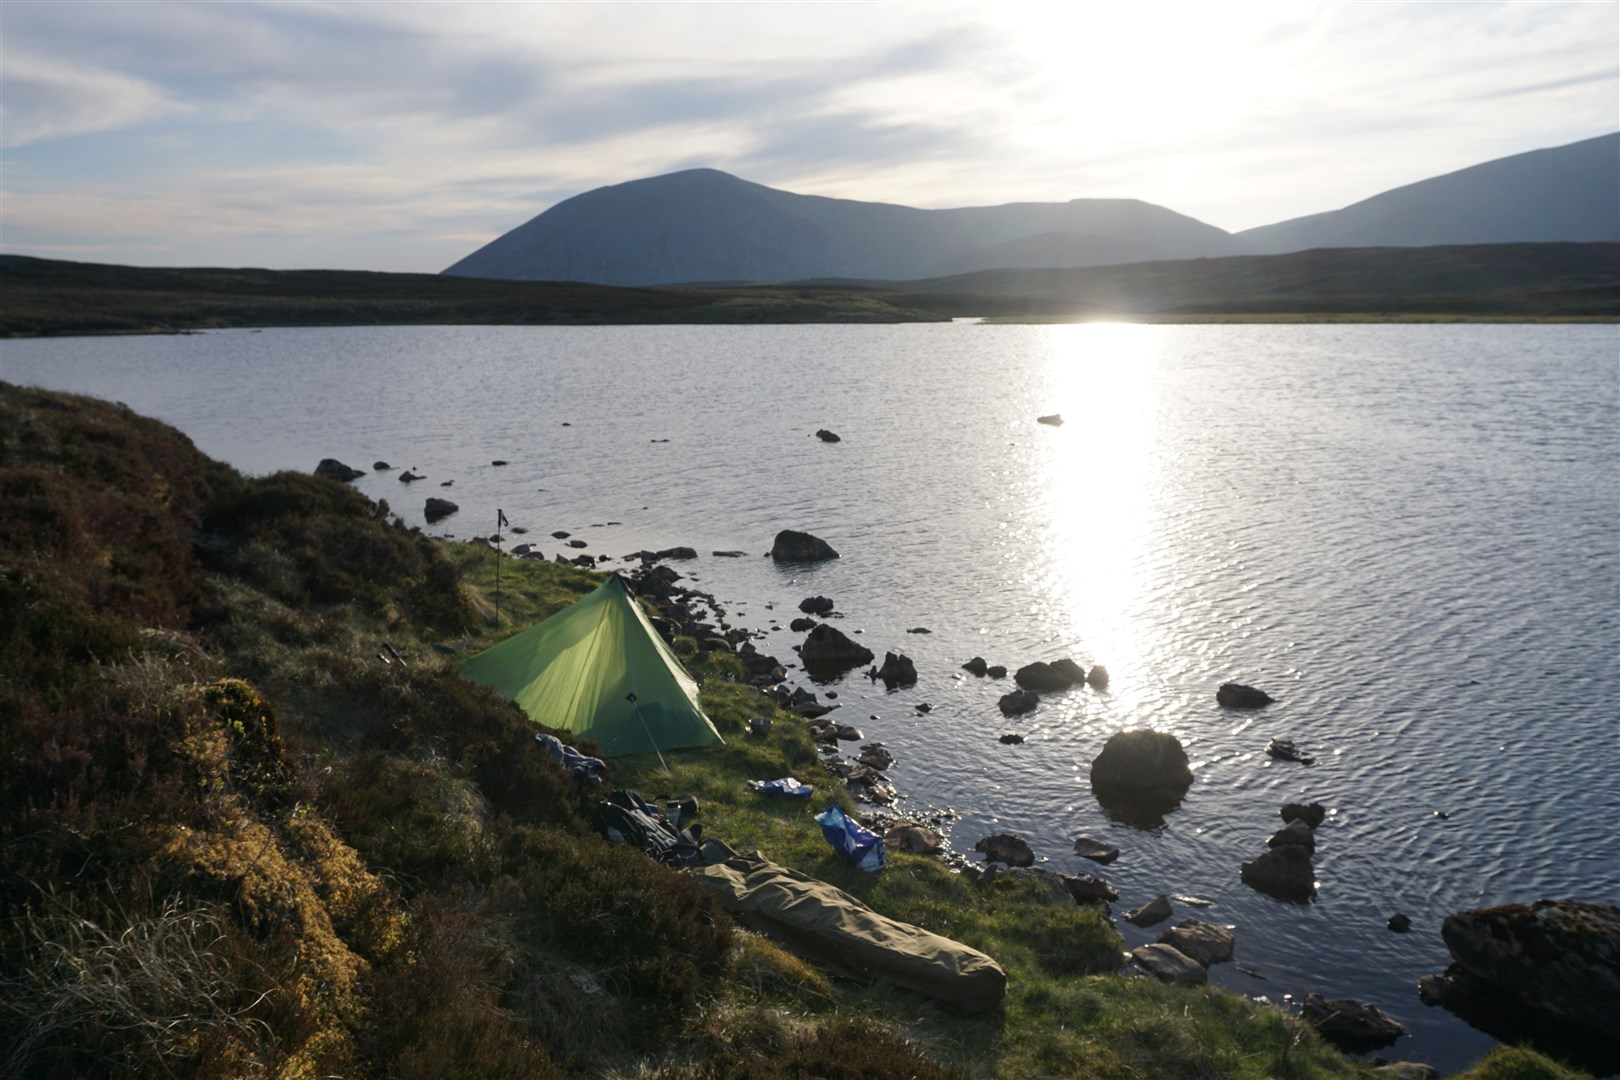 Wild camping should have a 'leave no trace' ethos.